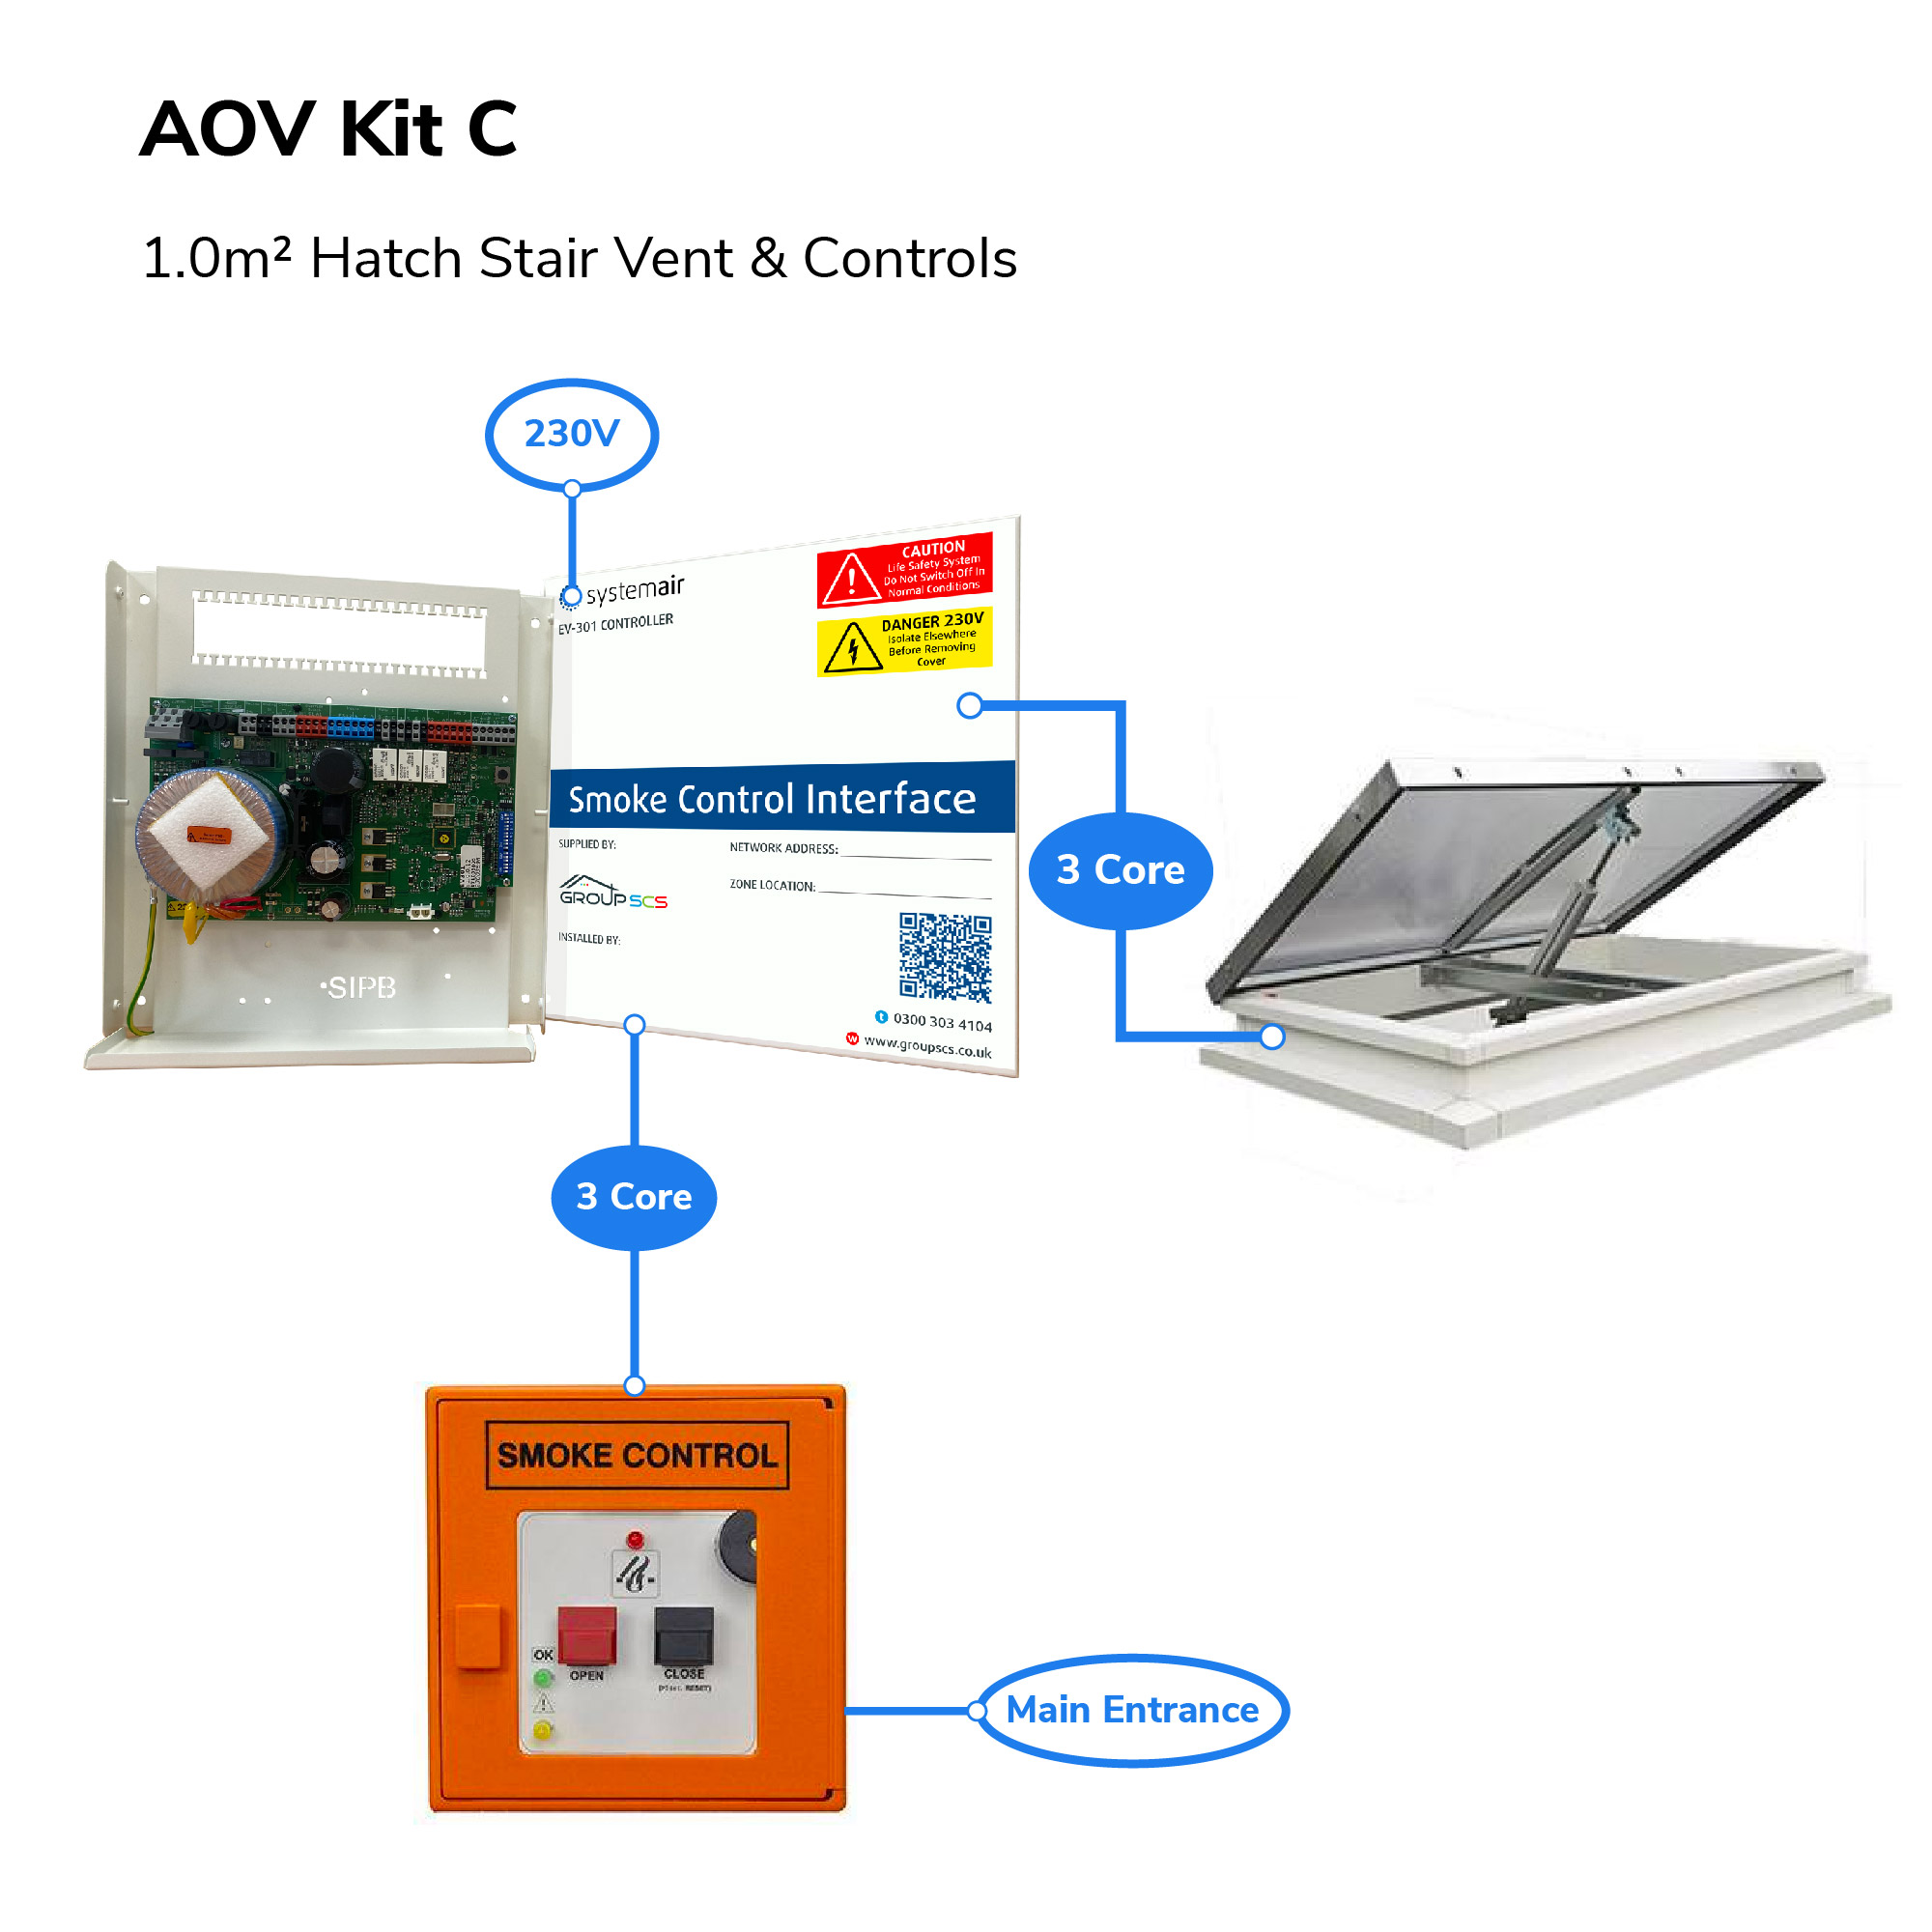 AOV Kit C Overview Image